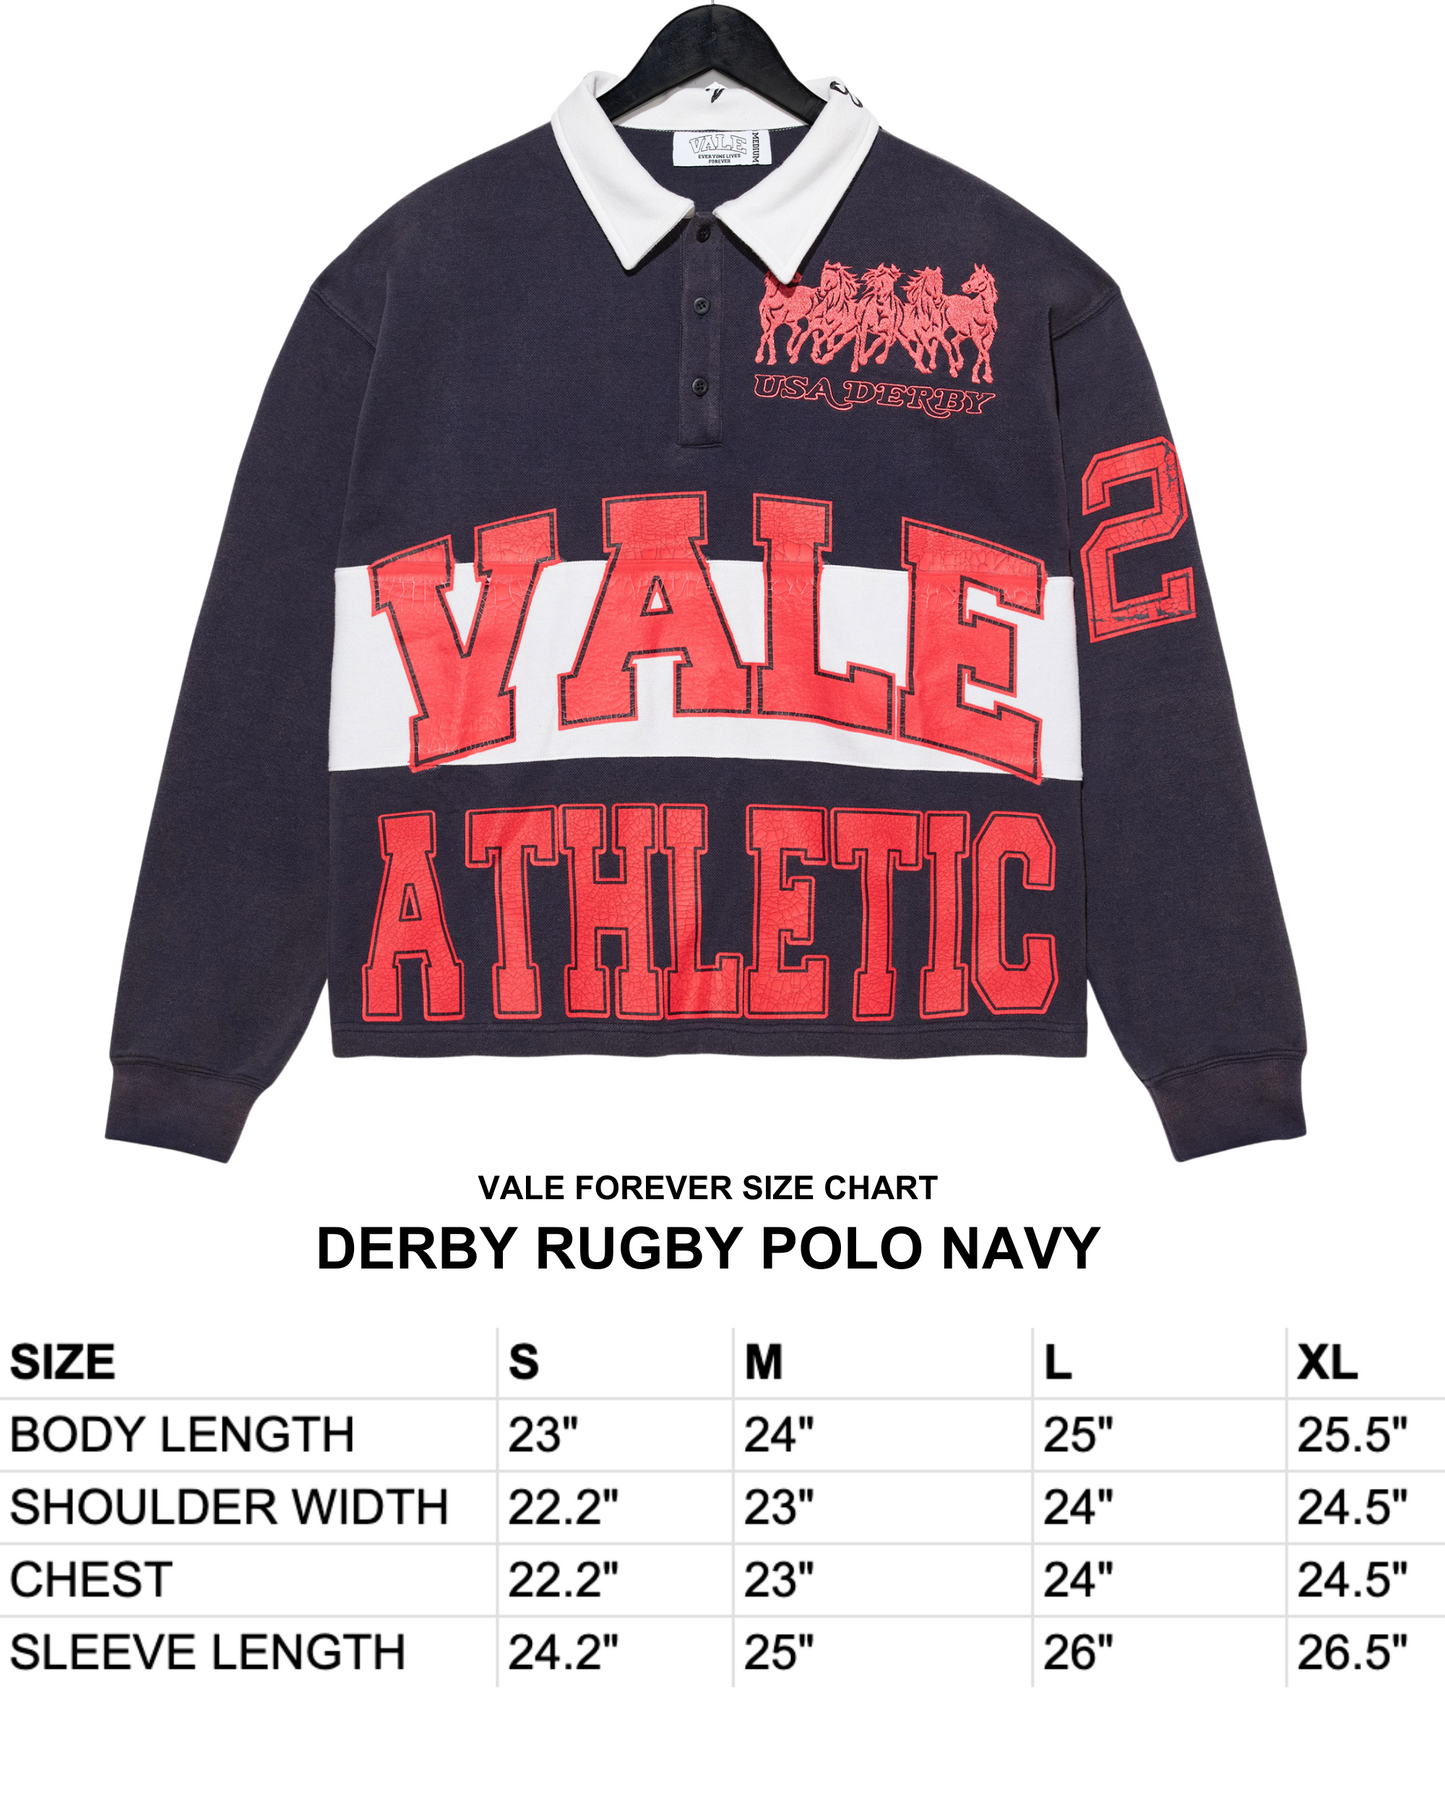 DERBY RUGBY POLO NAVY